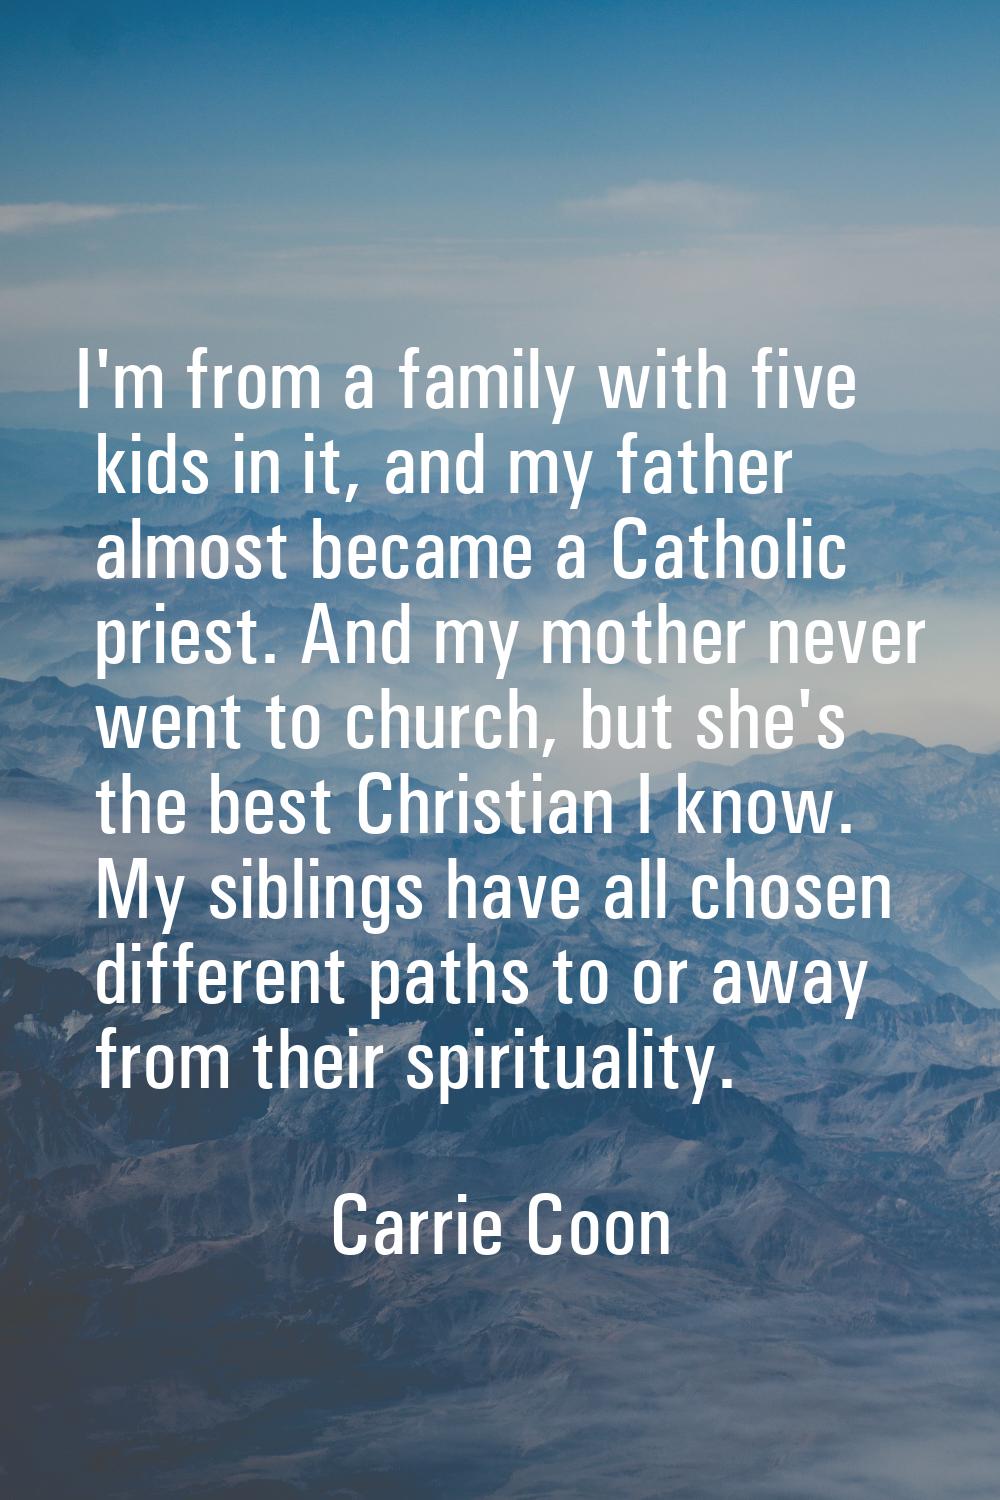 I'm from a family with five kids in it, and my father almost became a Catholic priest. And my mothe